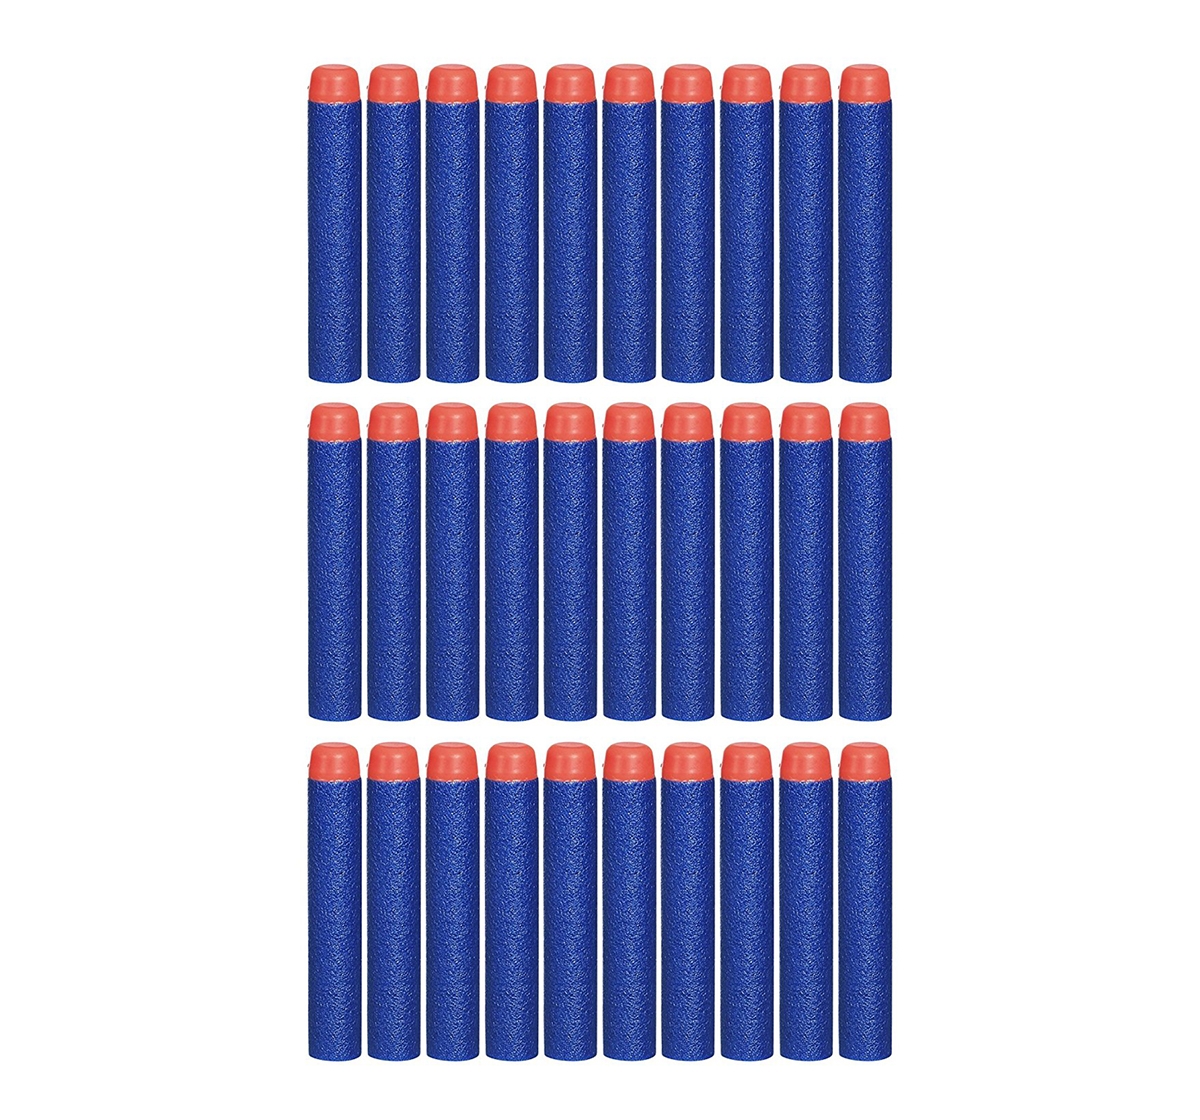 Nerf |  Nerf Darts 12-Pack Refill For Nerf Elite Blasters - age 8Y+ (Blue)